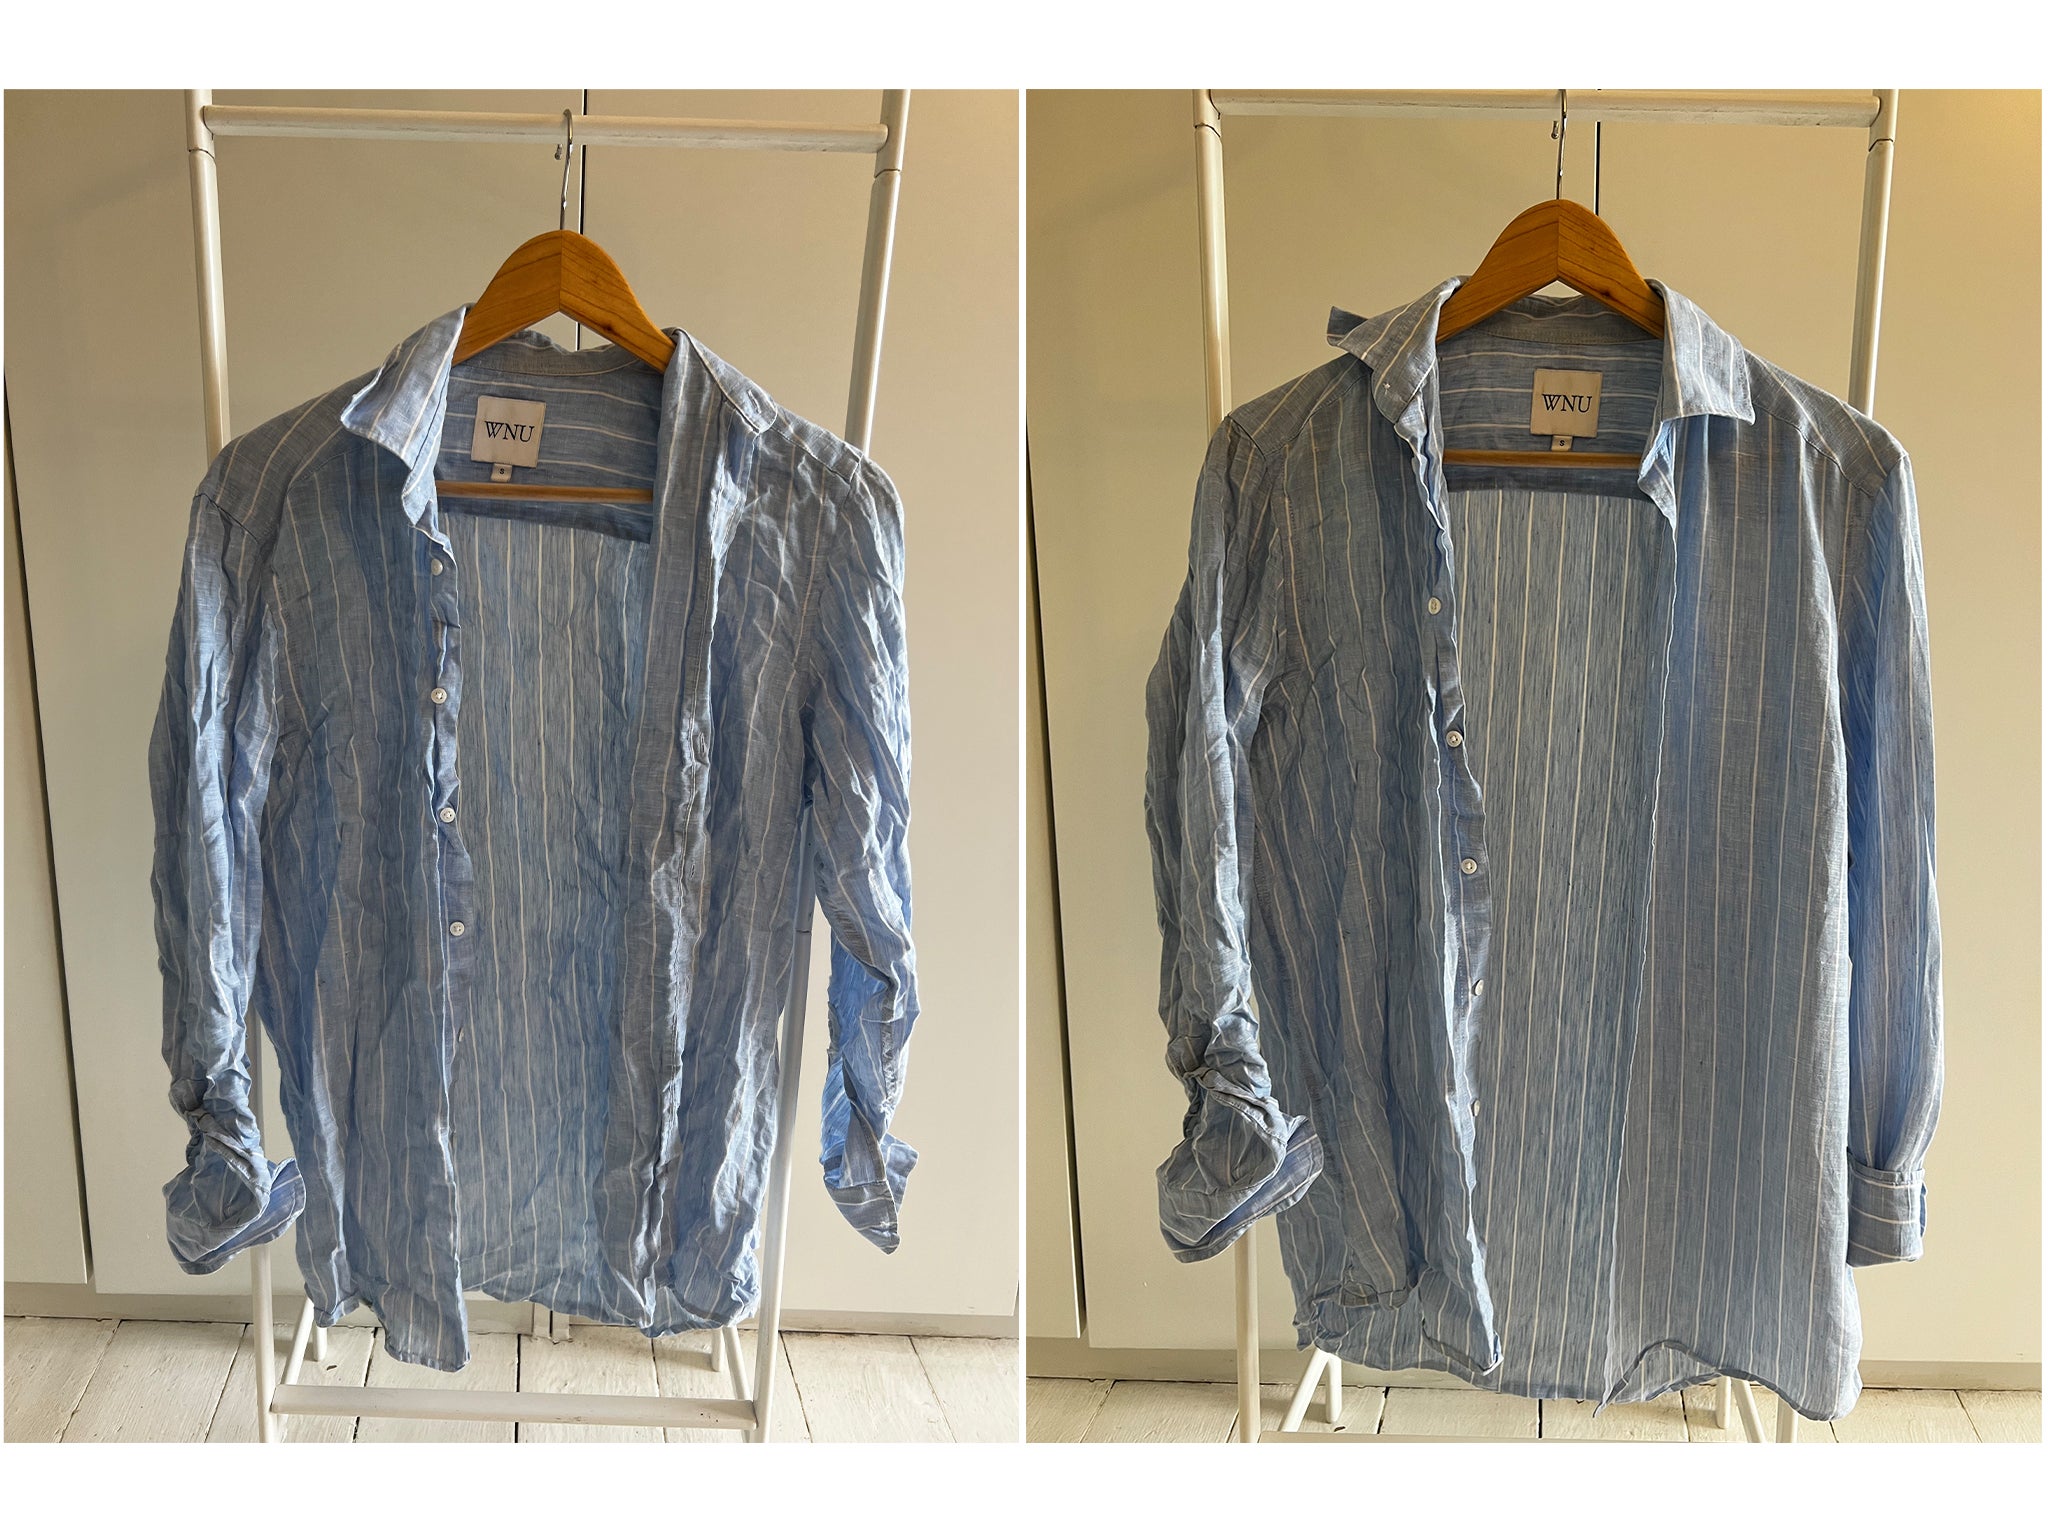 Linen shirt before and during steaming